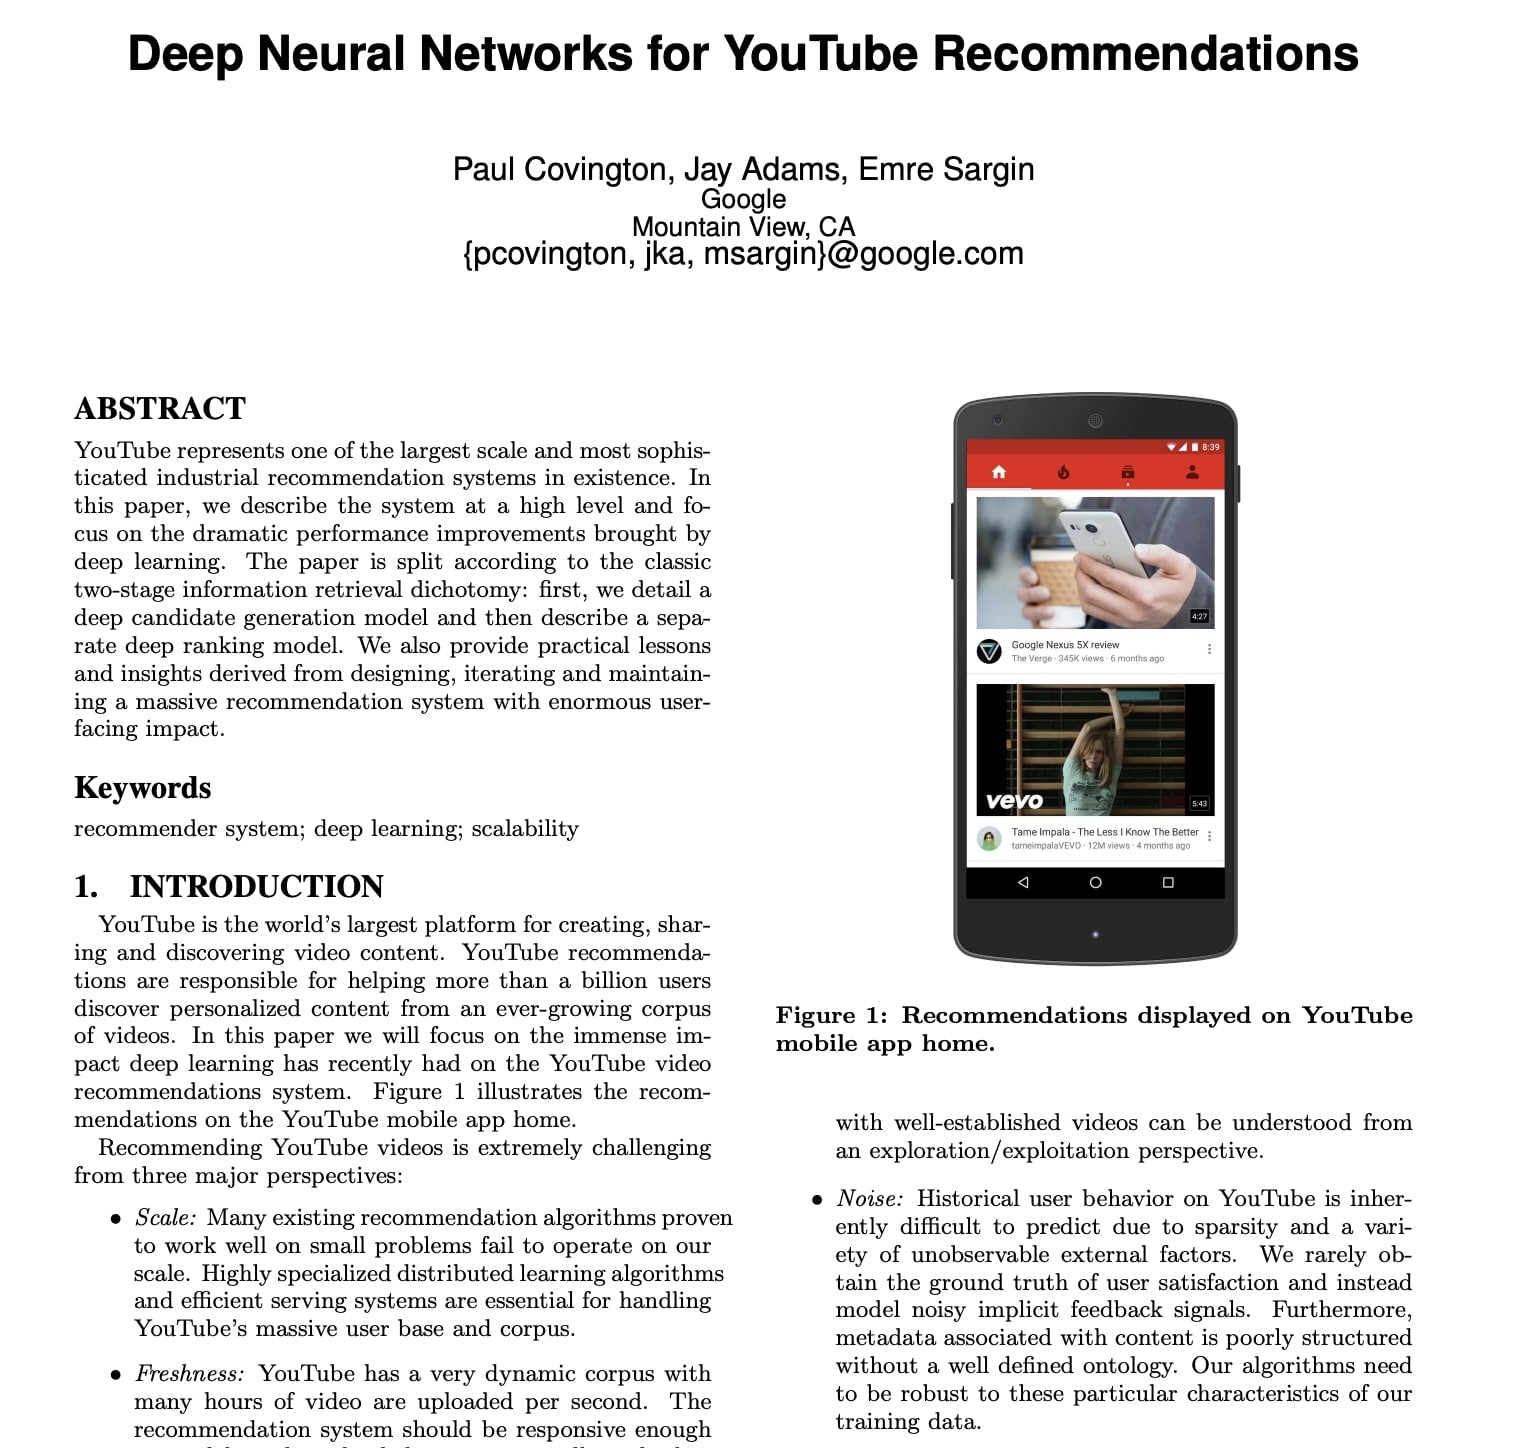 research paper detailing plans for the youtube's recommendation engine